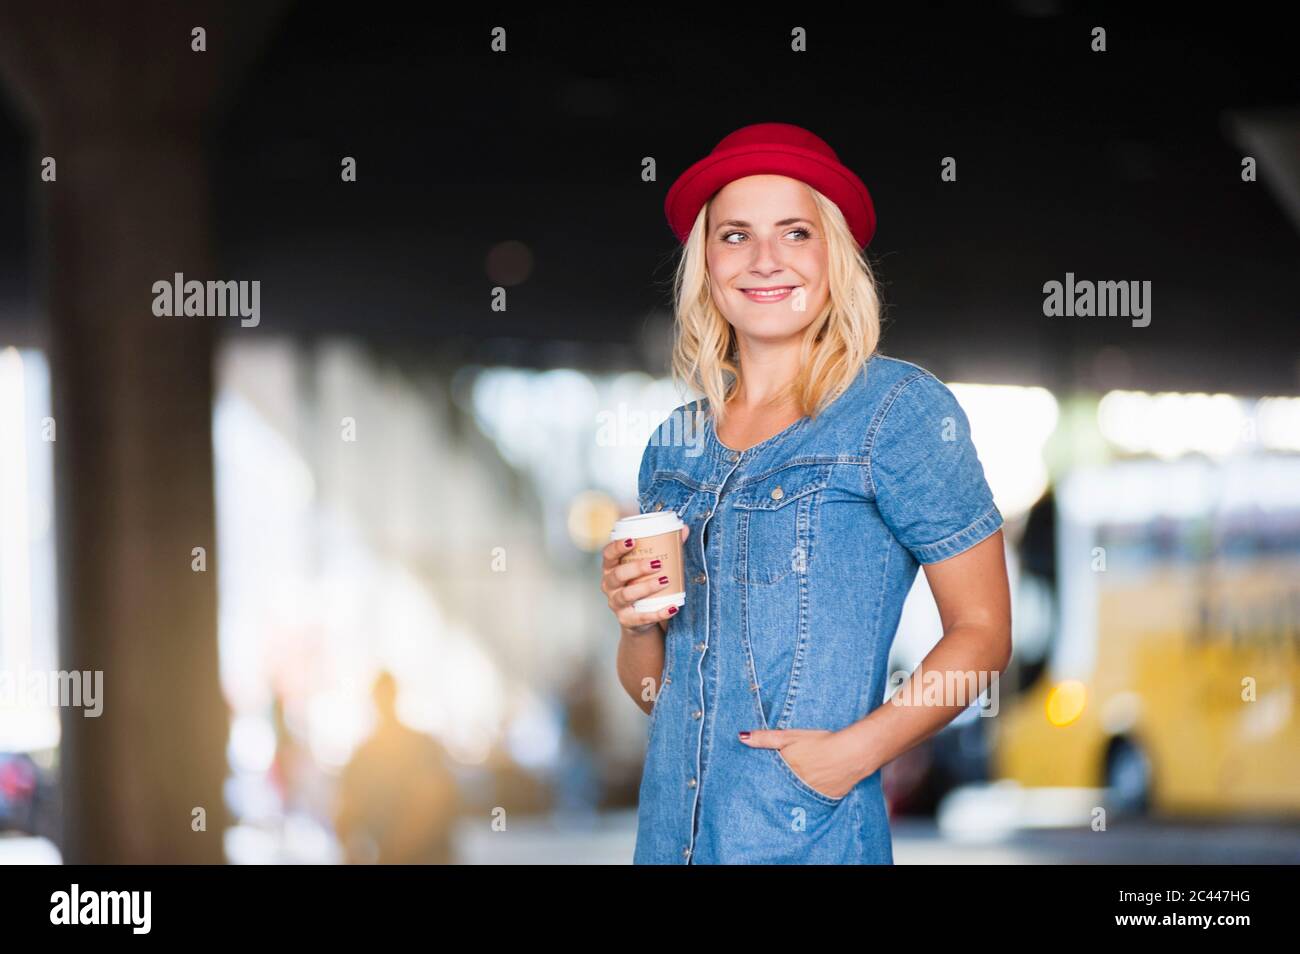 Portrait of smiling blond woman with coffee to go wearing denim dress and red hat Stock Photo